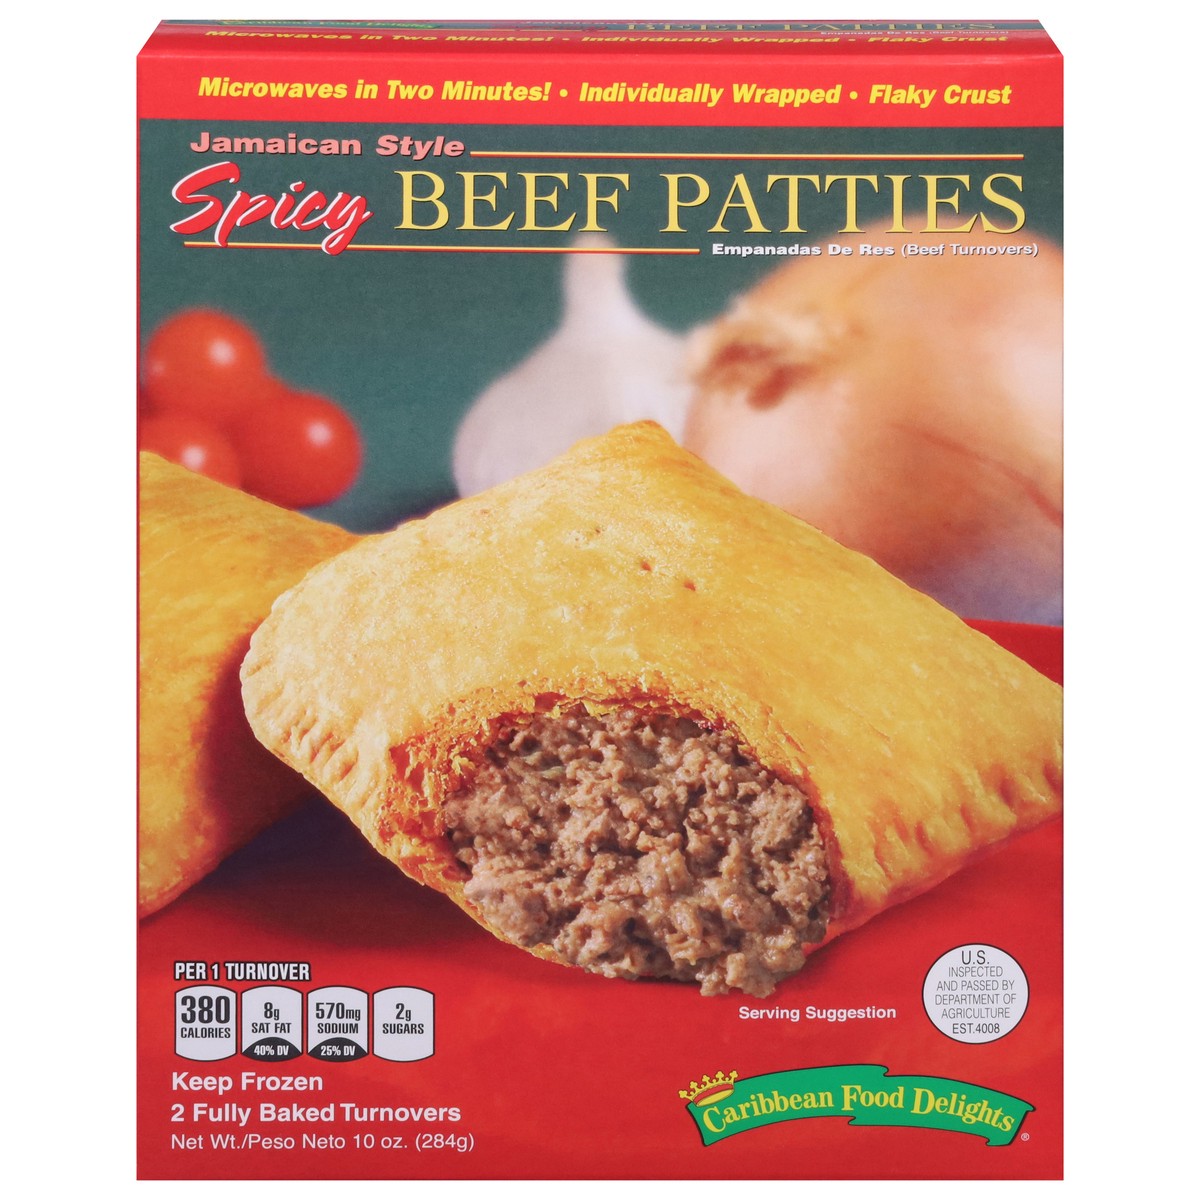 slide 1 of 17, Caribbean Food Delights Jamaican Style Spicy Beef Patties Turnovers 2 ea, 2 ct